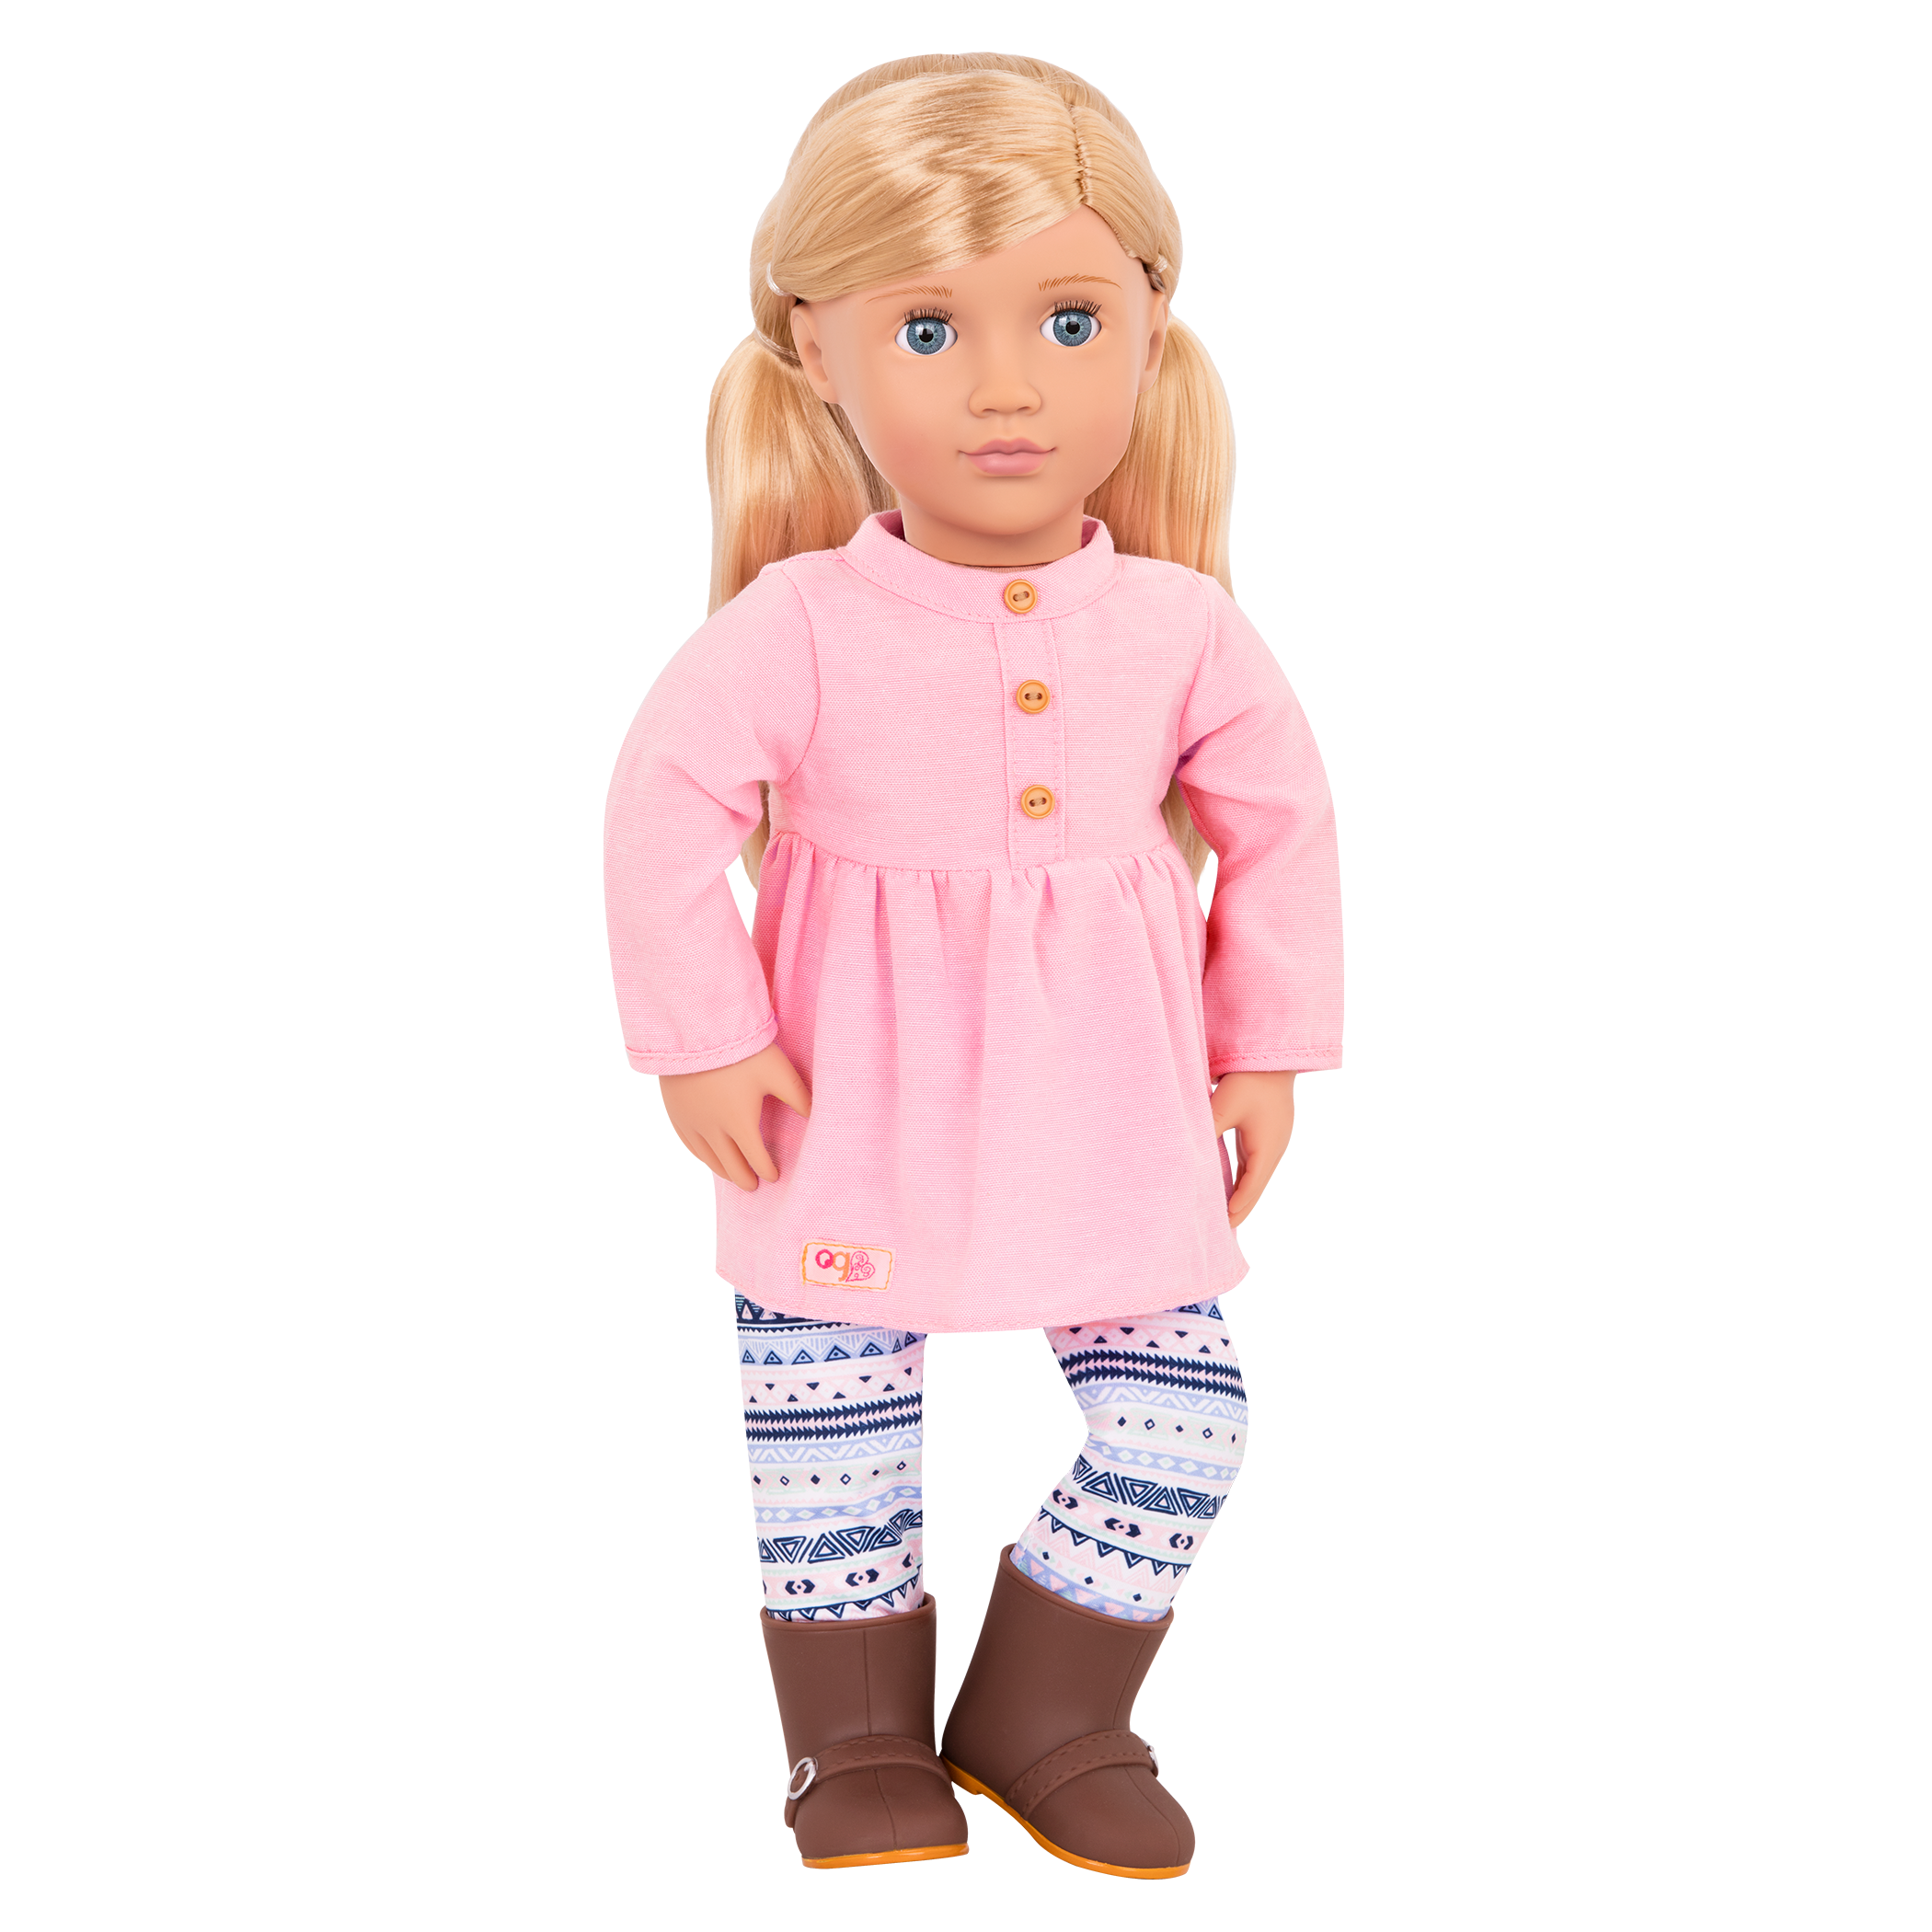 18-inch doll with blonde hair, blue eyes, winter outfits and storybook